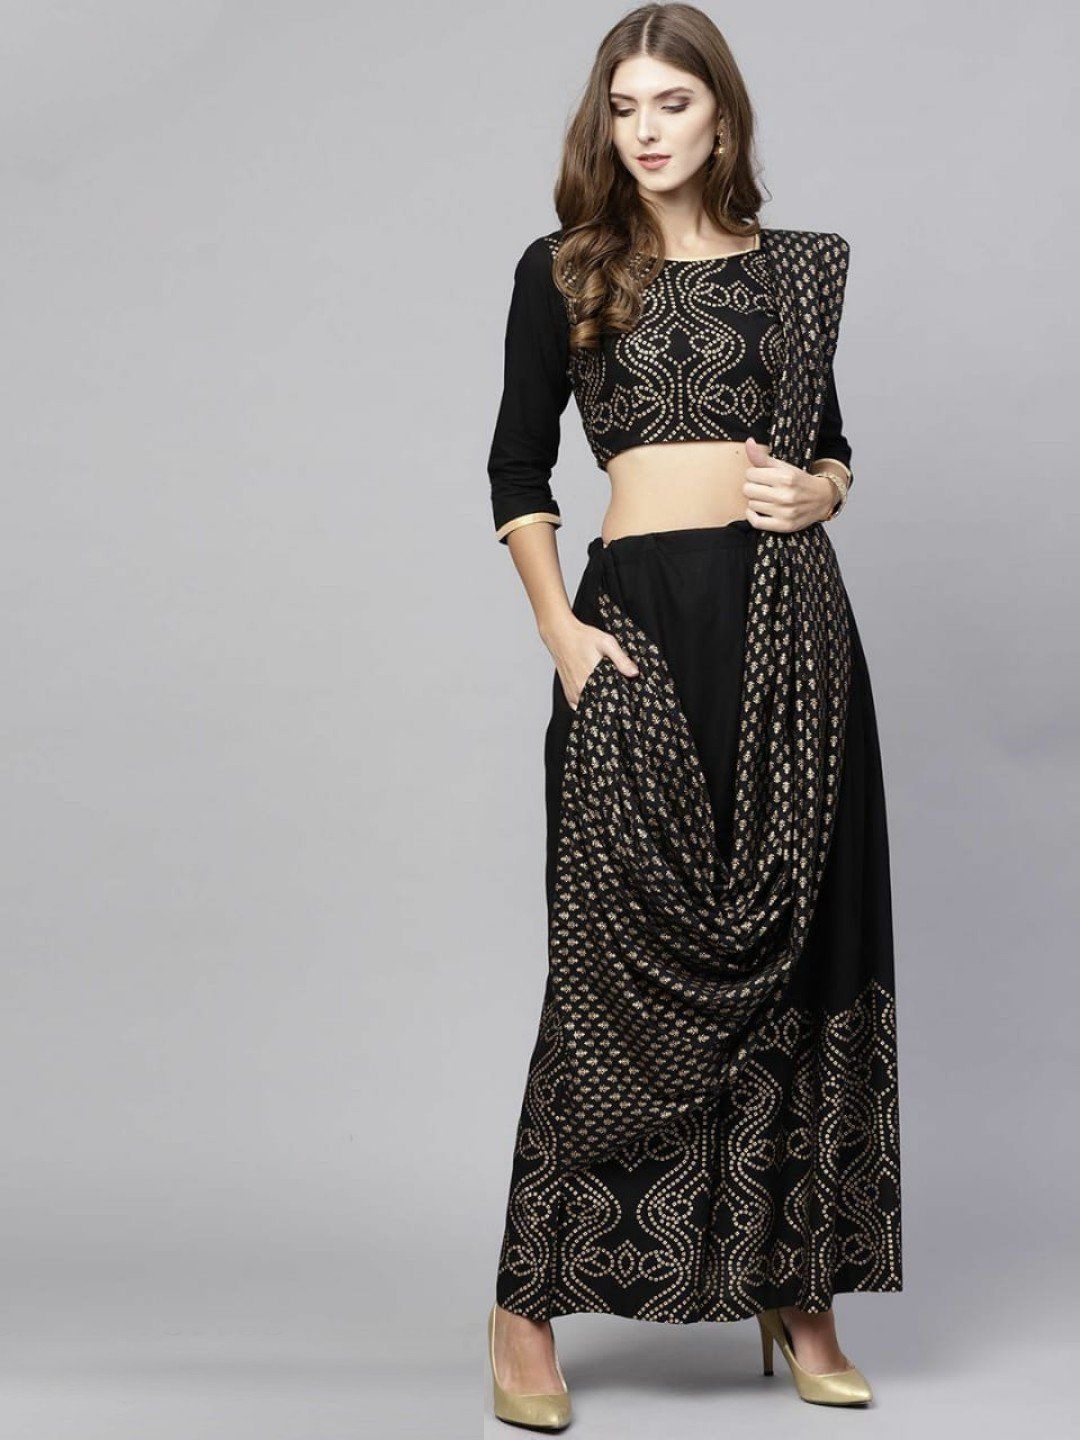 Lehenga in black with gold foil embroidery work - Indian Clothing in Denver, CO, Aurora, CO, Boulder, CO, Fort Collins, CO, Colorado Springs, CO, Parker, CO, Highlands Ranch, CO, Cherry Creek, CO, Centennial, CO, and Longmont, CO. Nationwide shipping USA - India Fashion X